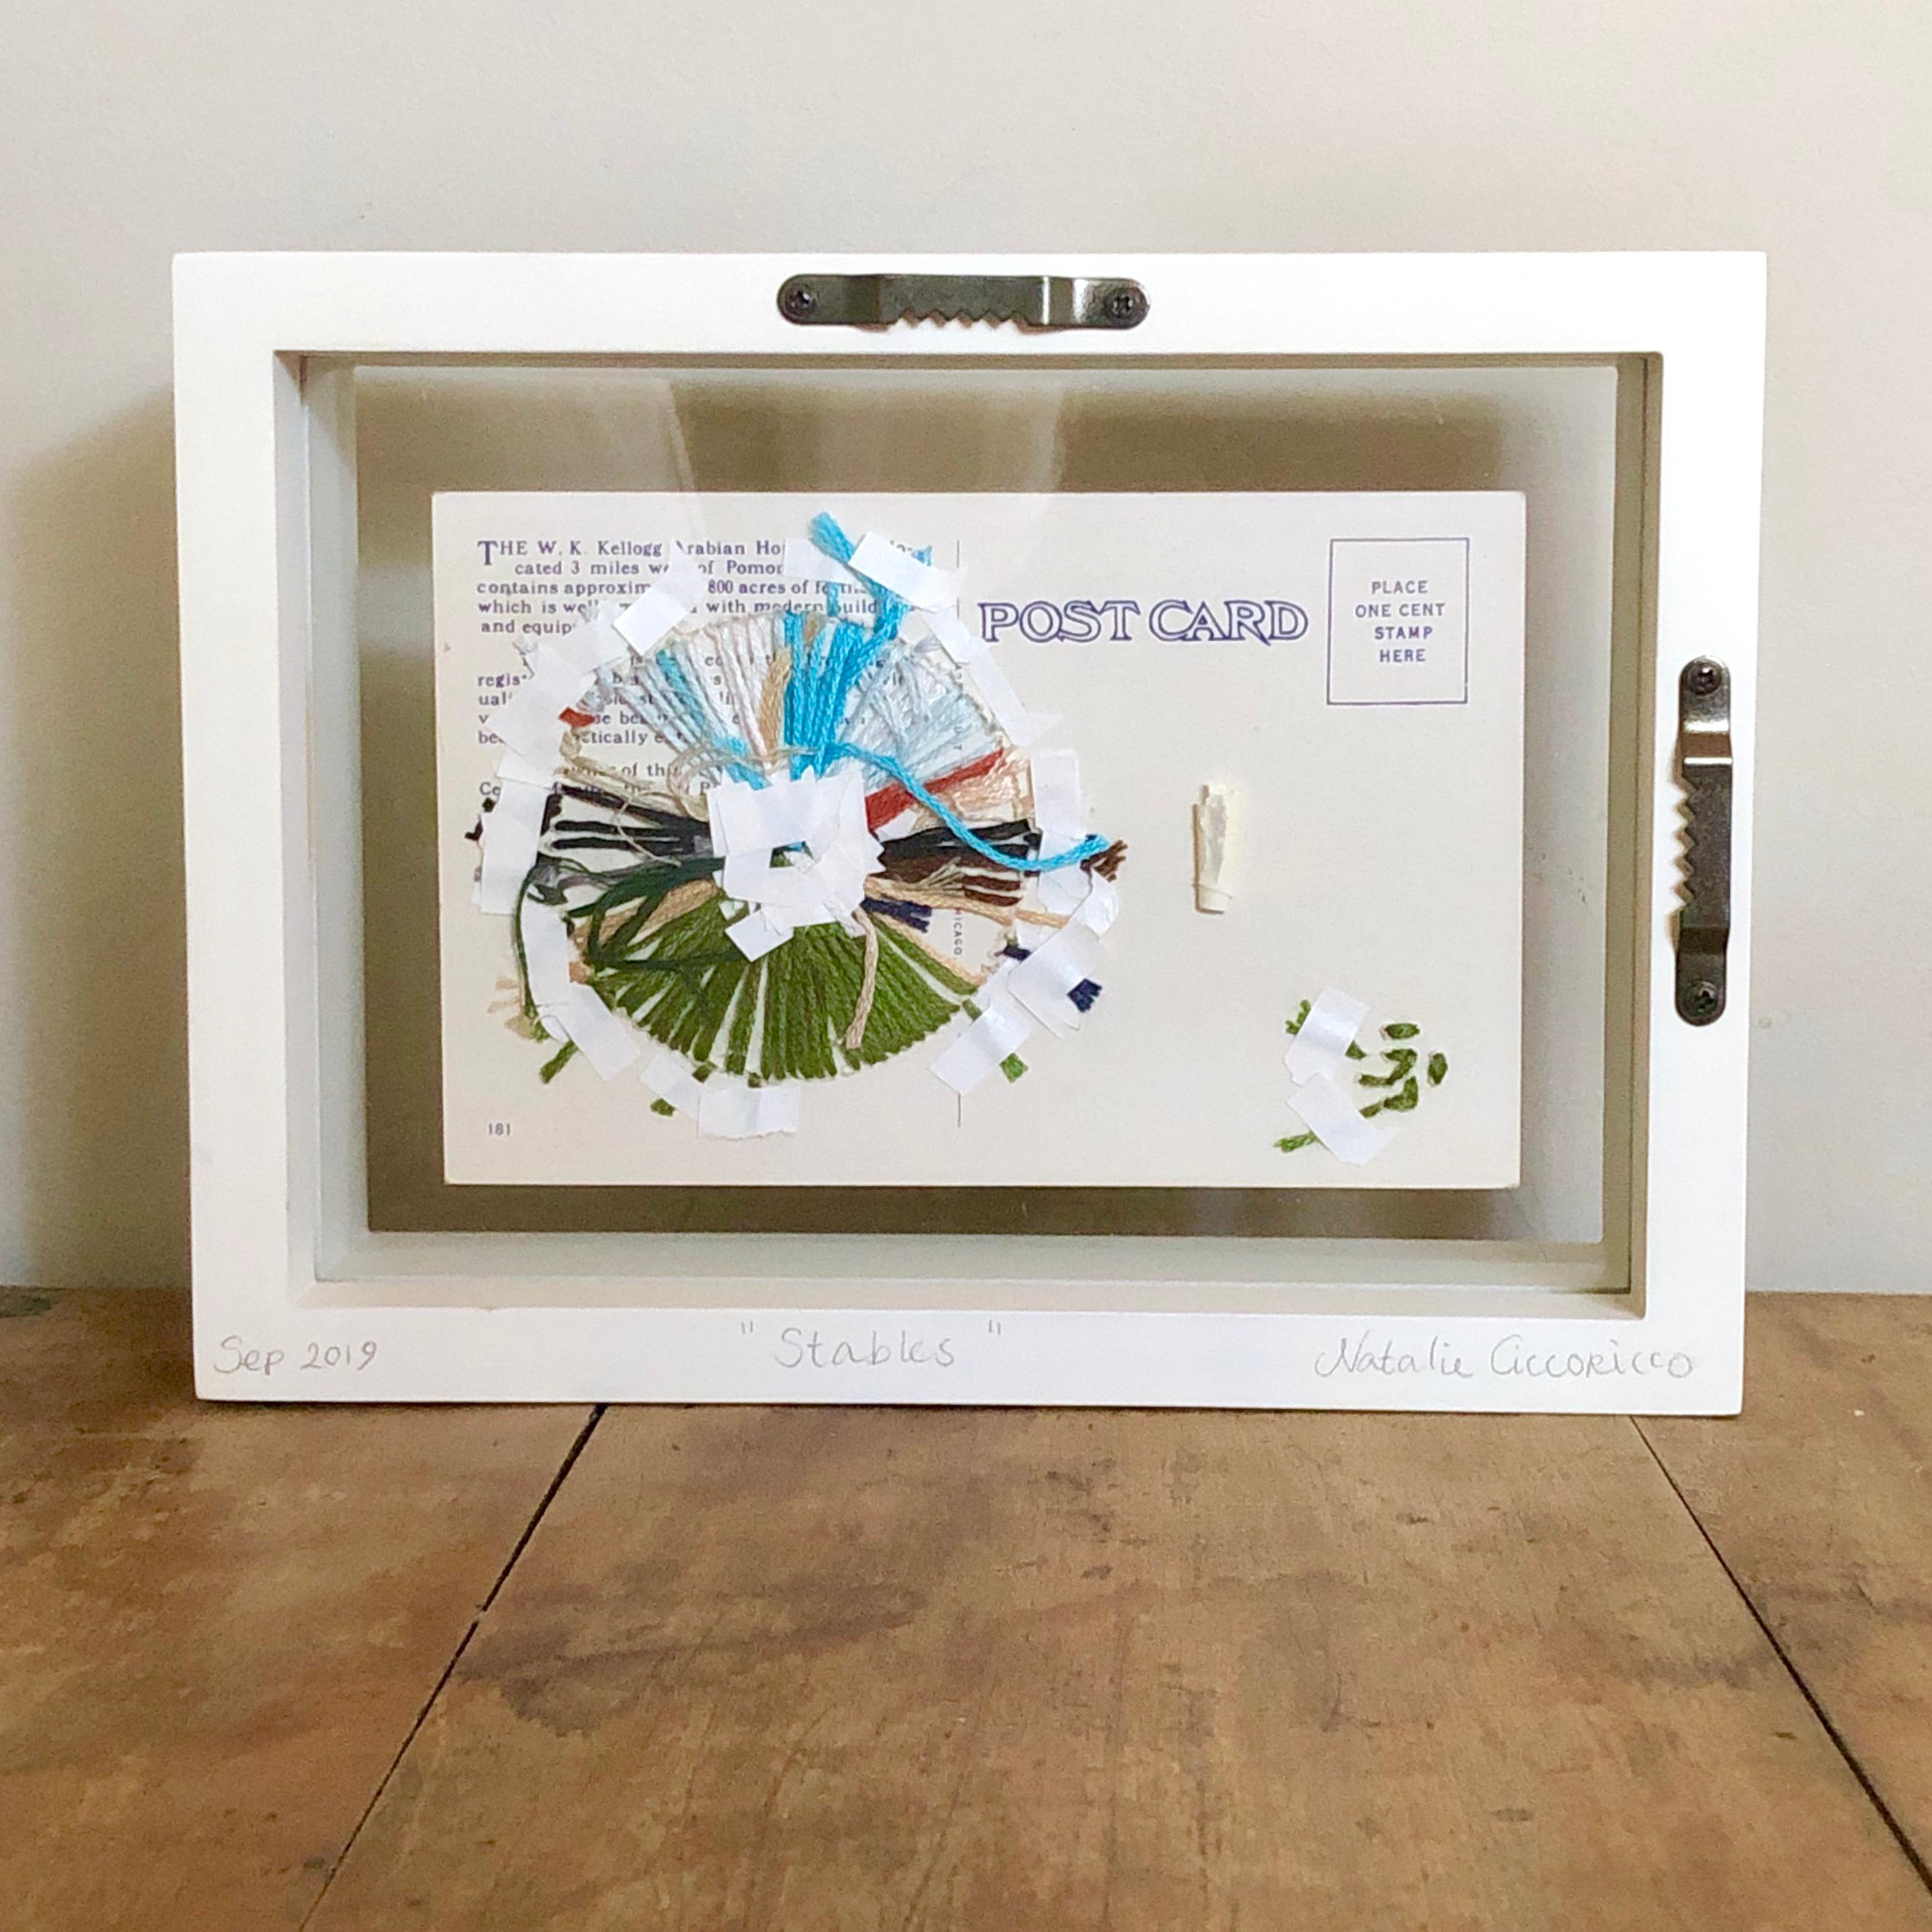 Natalie Ciccoricco has brought these vintage postcard back to life with her unique embroidery.  Drawing in colors from the postcard, she creates her signature color hole in this beautifully frame work.  The back of the frame is clear, allowing the